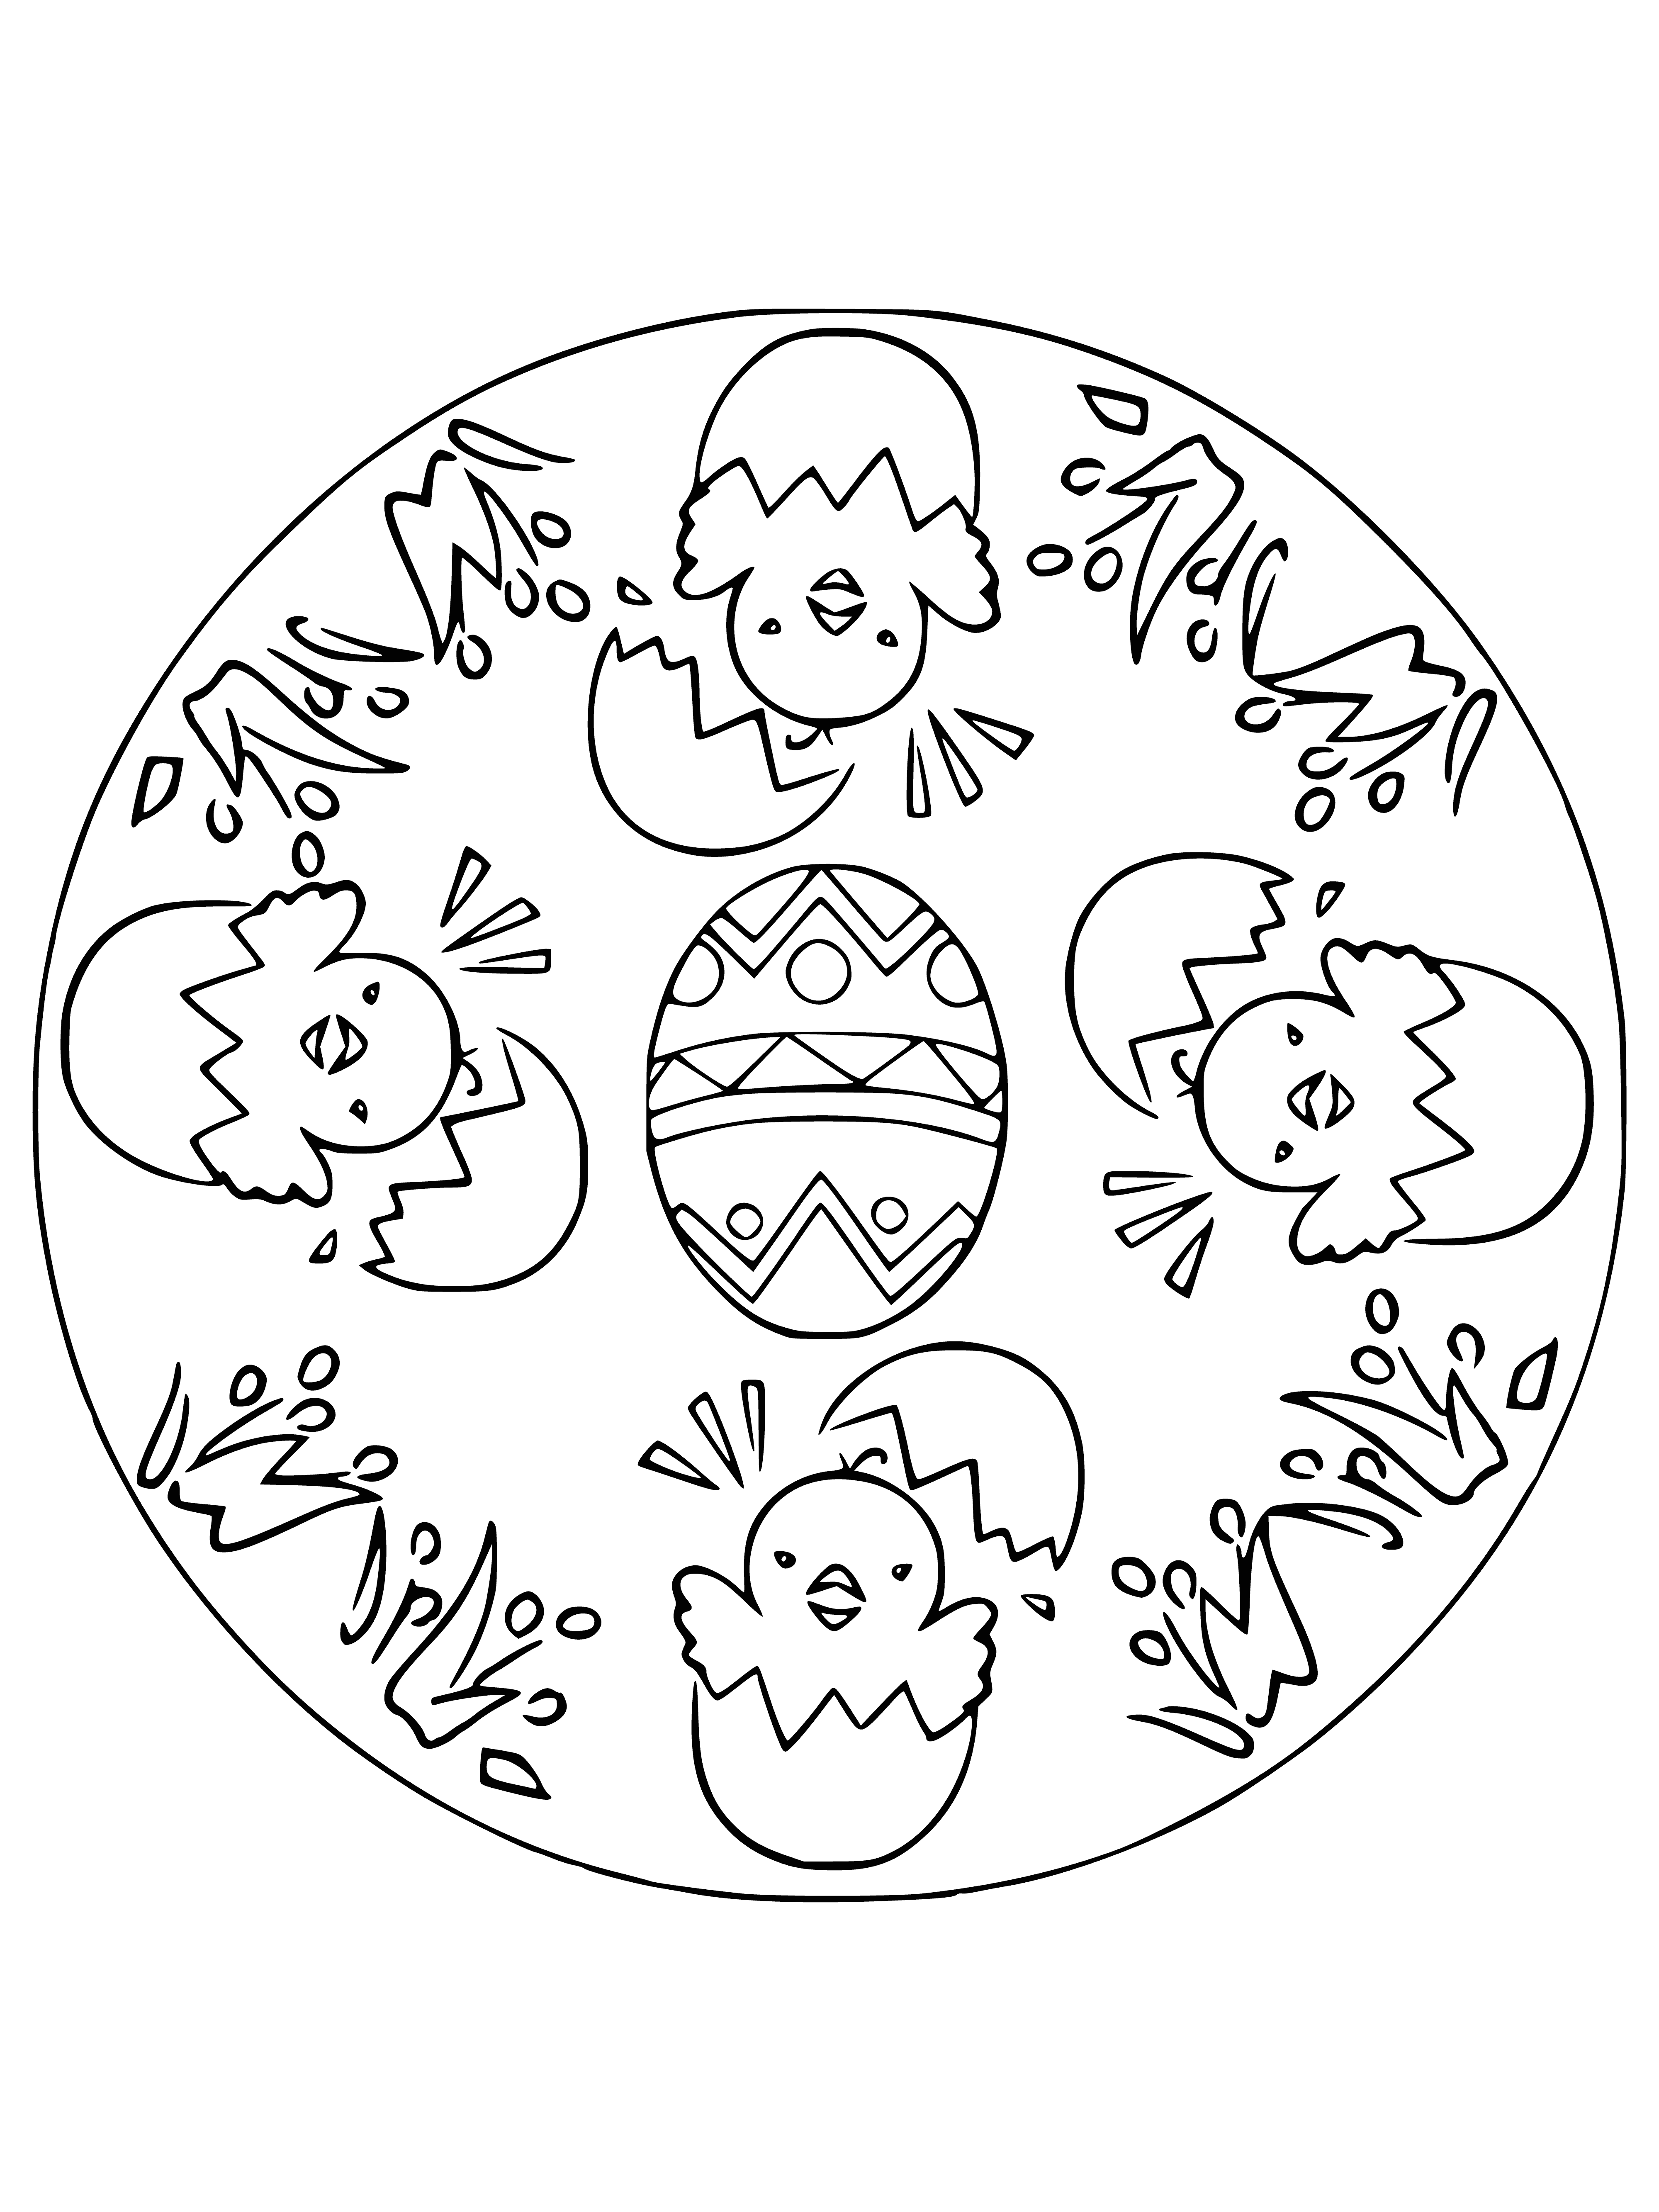 coloring page: -> Intricate mandala w/ yellow egg and green plant in center, purple flowers around edge.